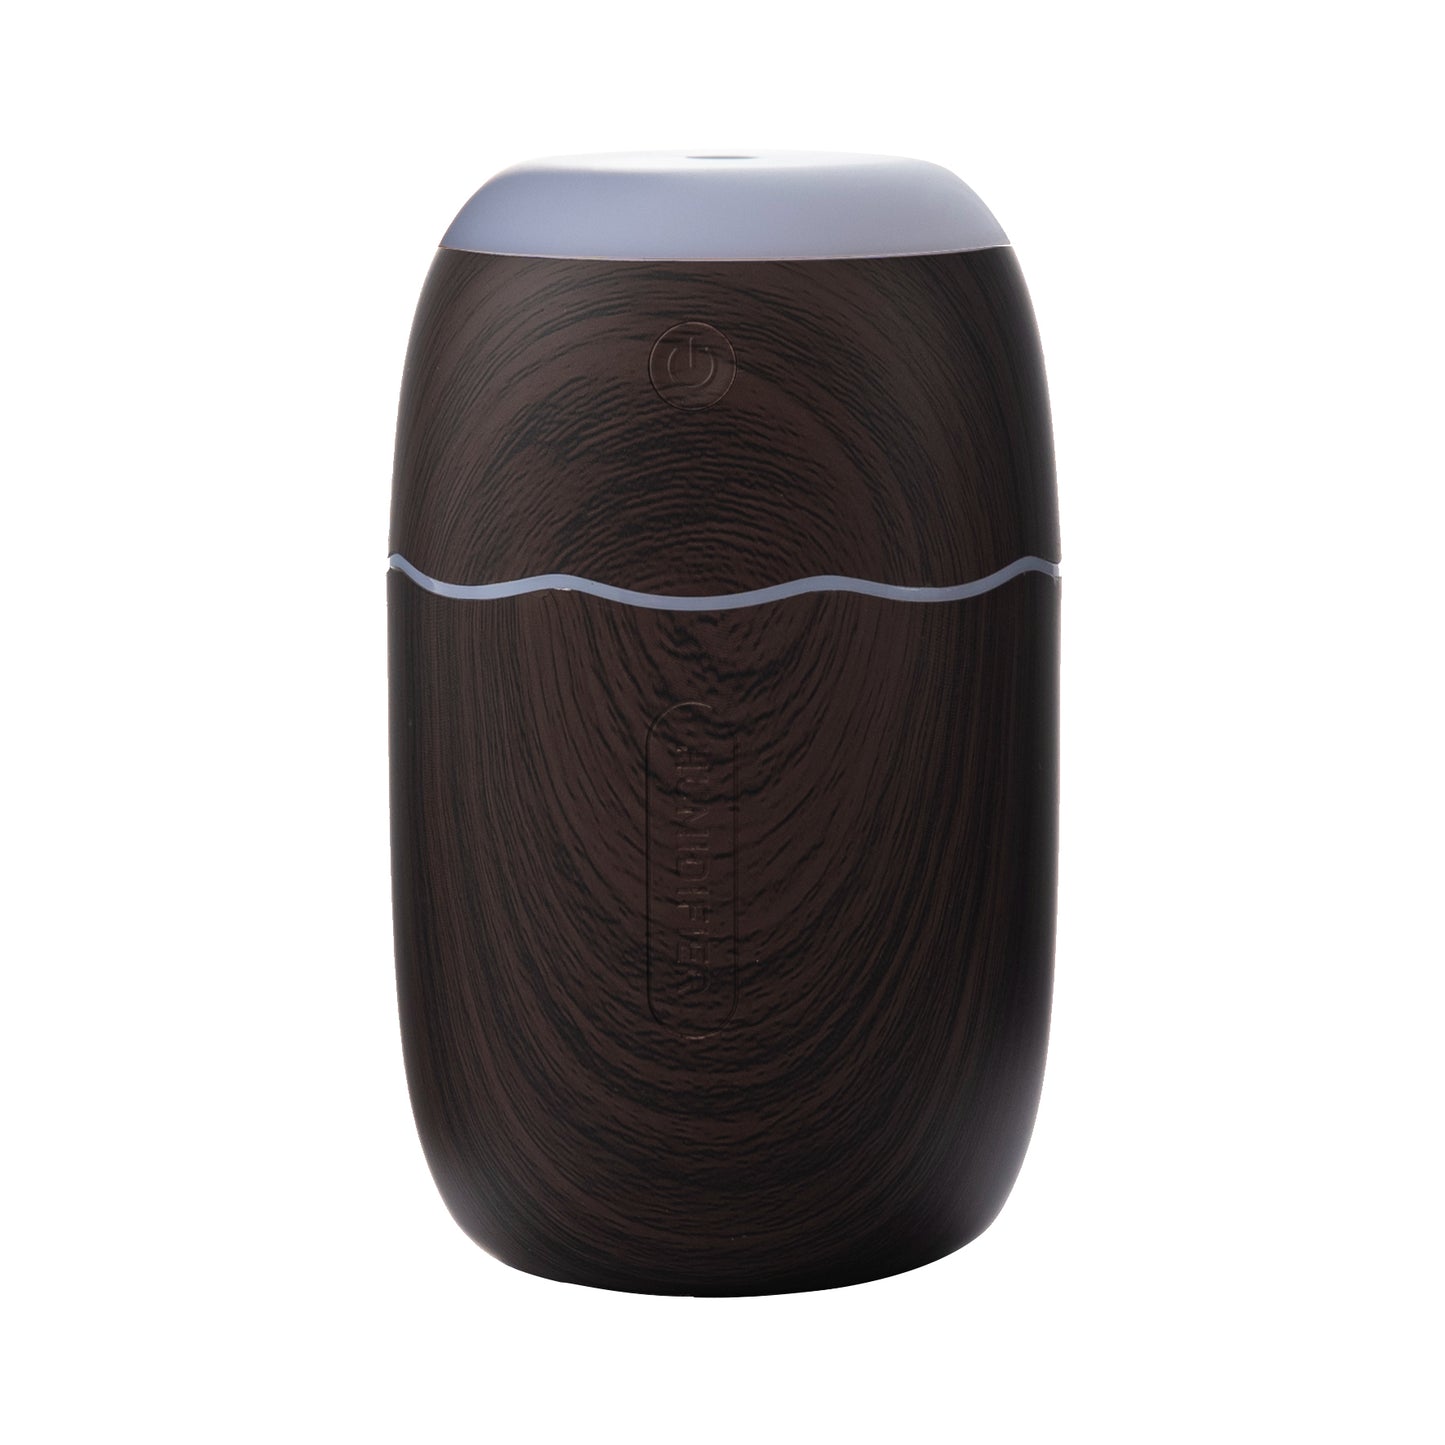 Portable car home h2o air humidifier mist usb cool wood for office steam aroma diffuser humidifier 7 color night